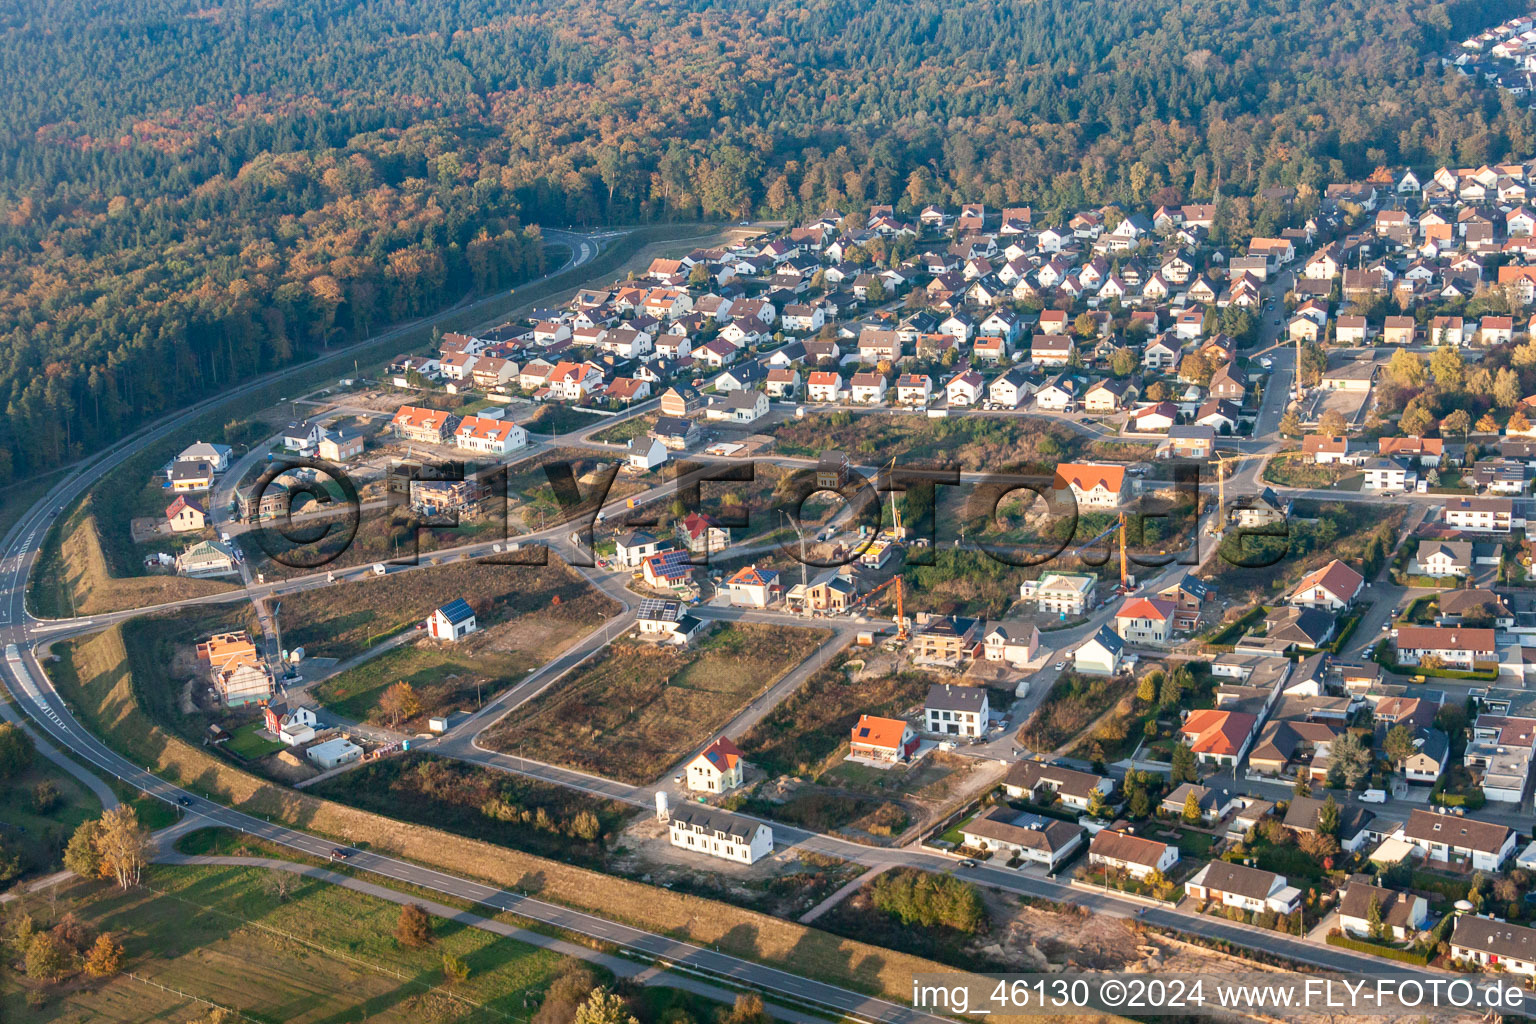 Aerial view of Forstlandallee in Jockgrim in the state Rhineland-Palatinate, Germany